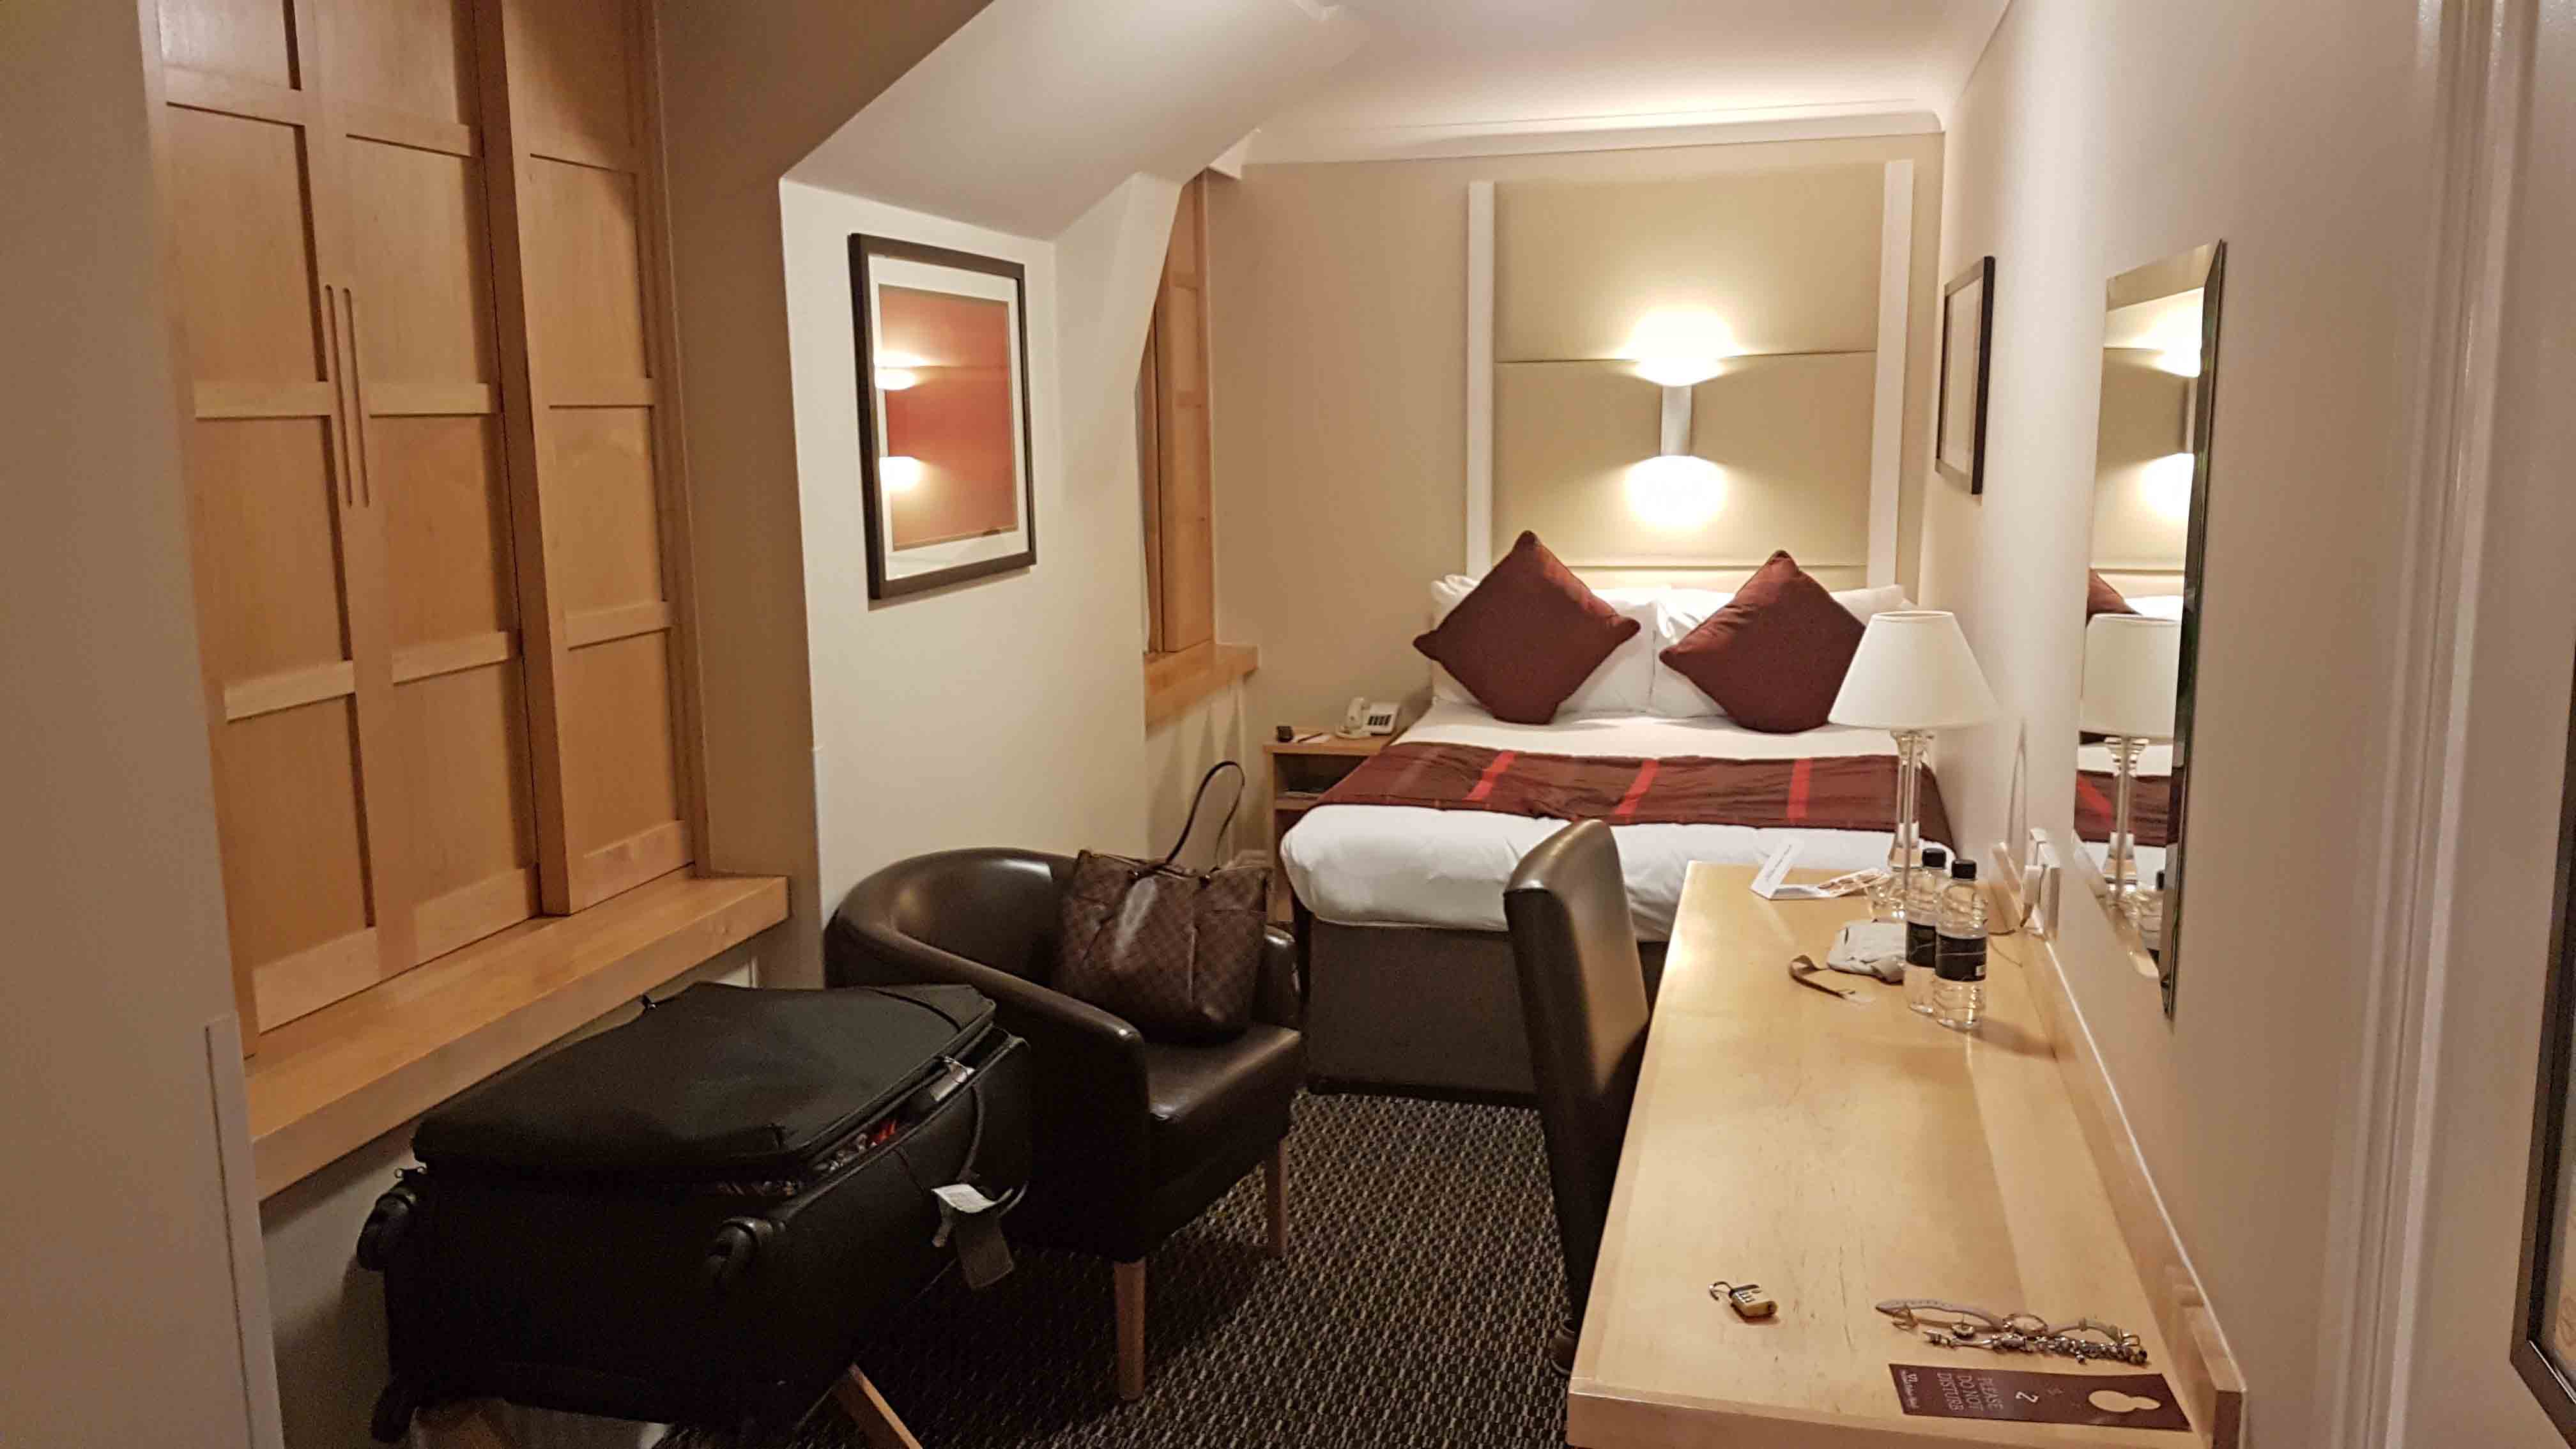 Cozy double room - Strand Palace Hotel - Londres